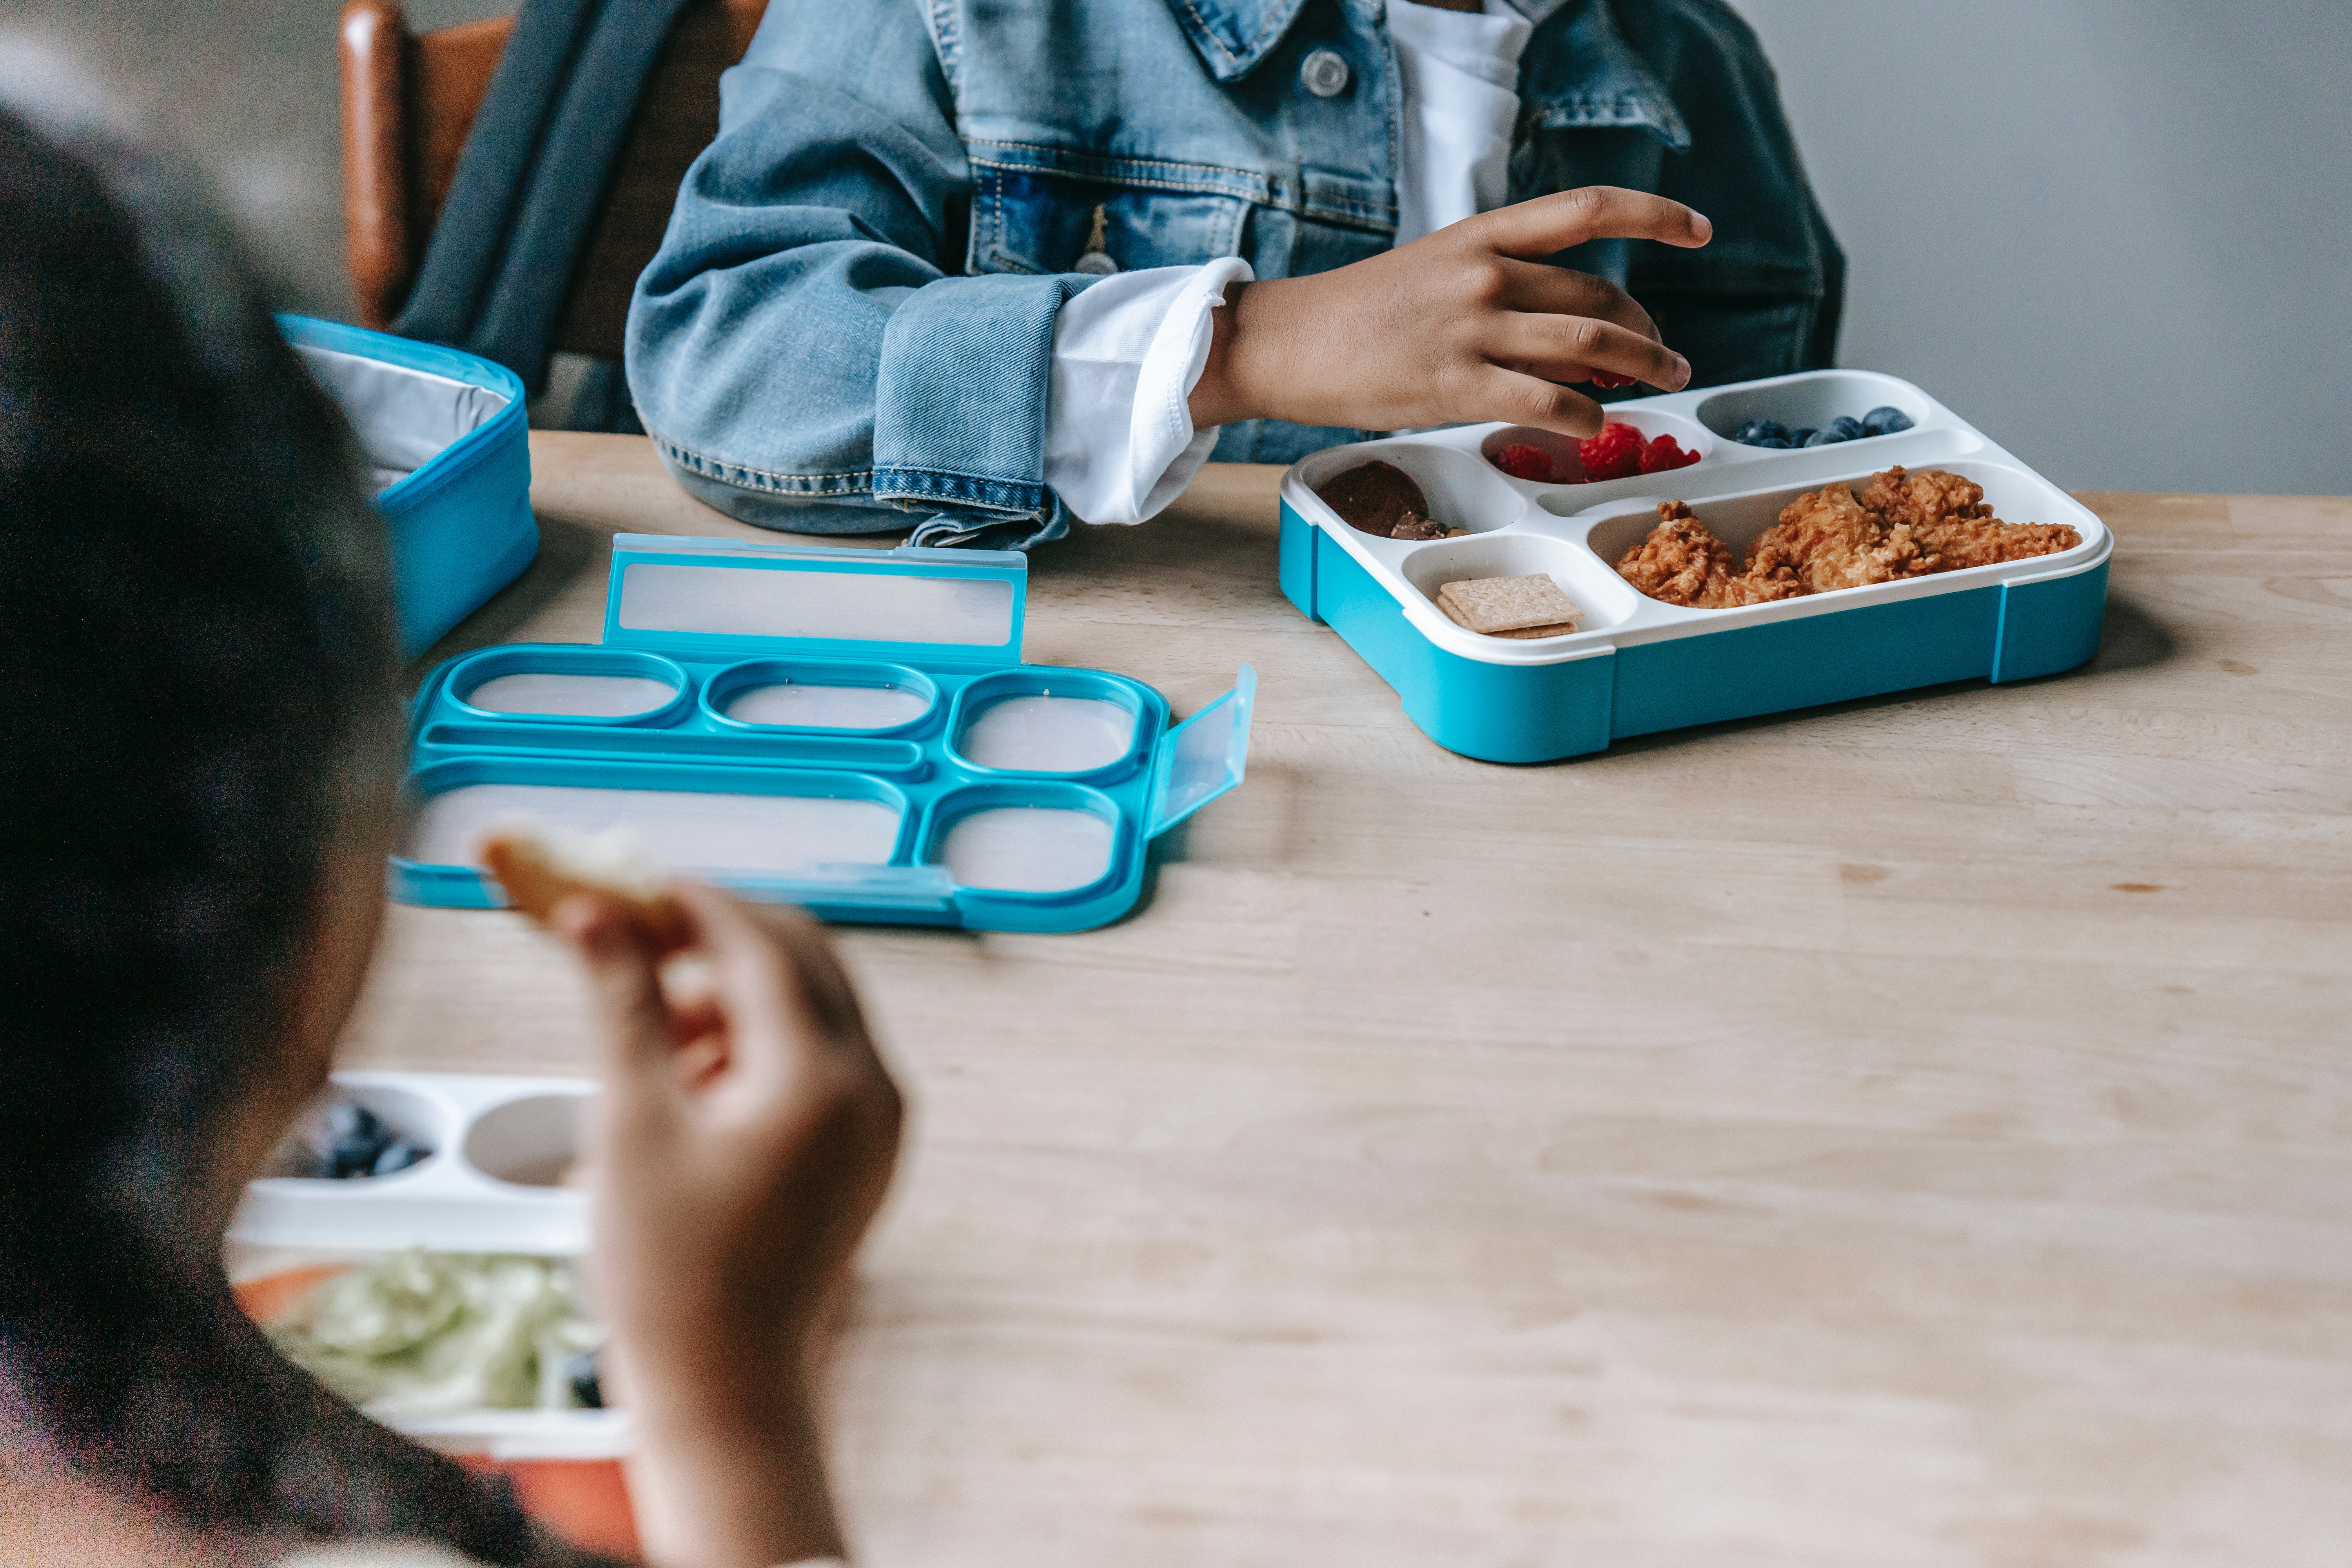 The boy couldn't eat the same way other kids his age did. | Source: Pexels